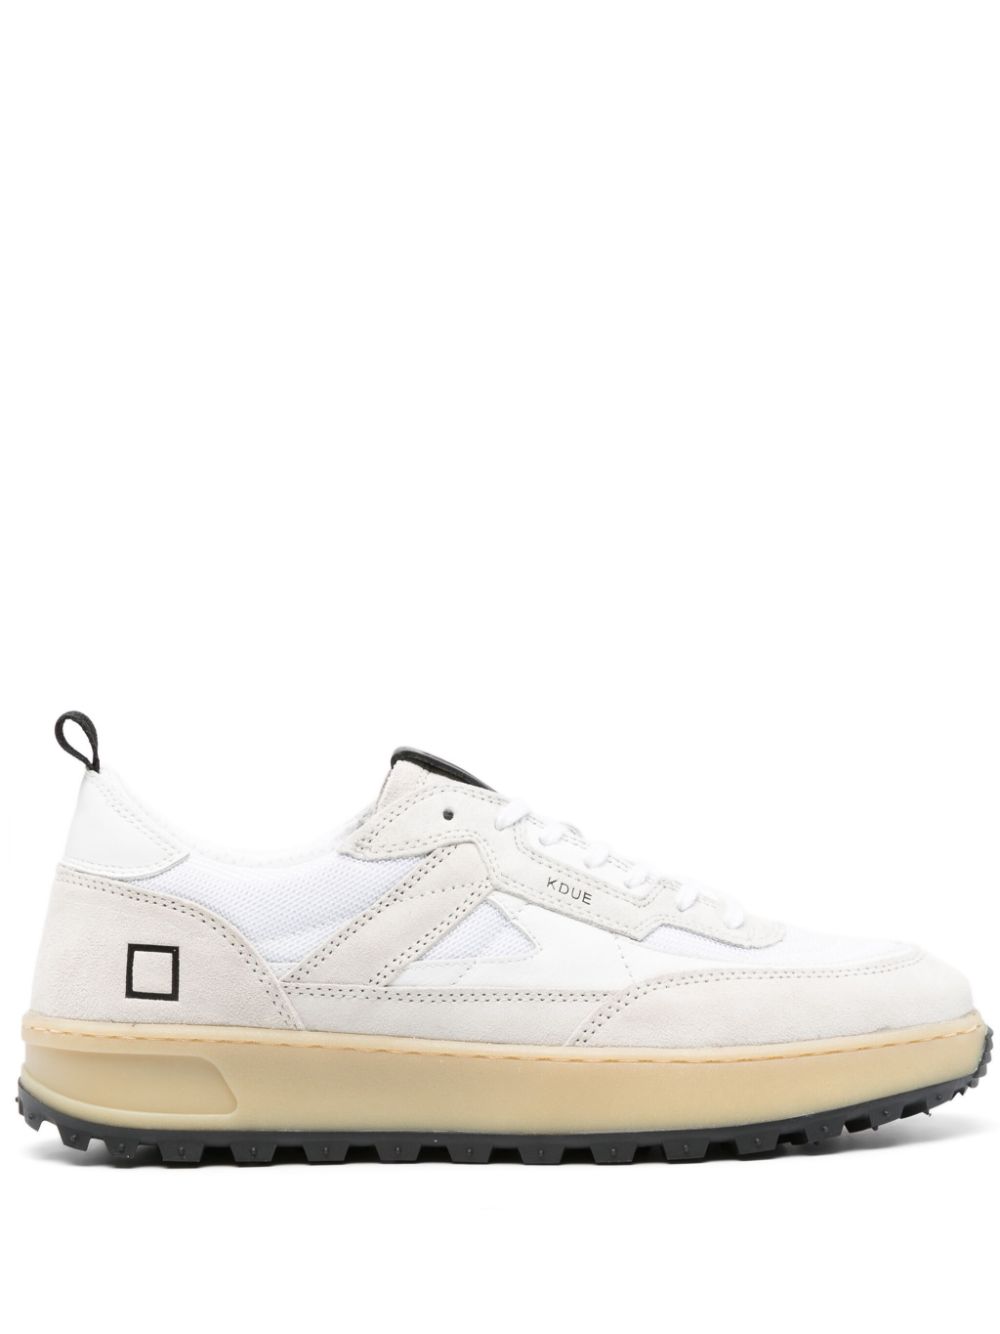 DATE KDUE PANELLED SNEAKERS